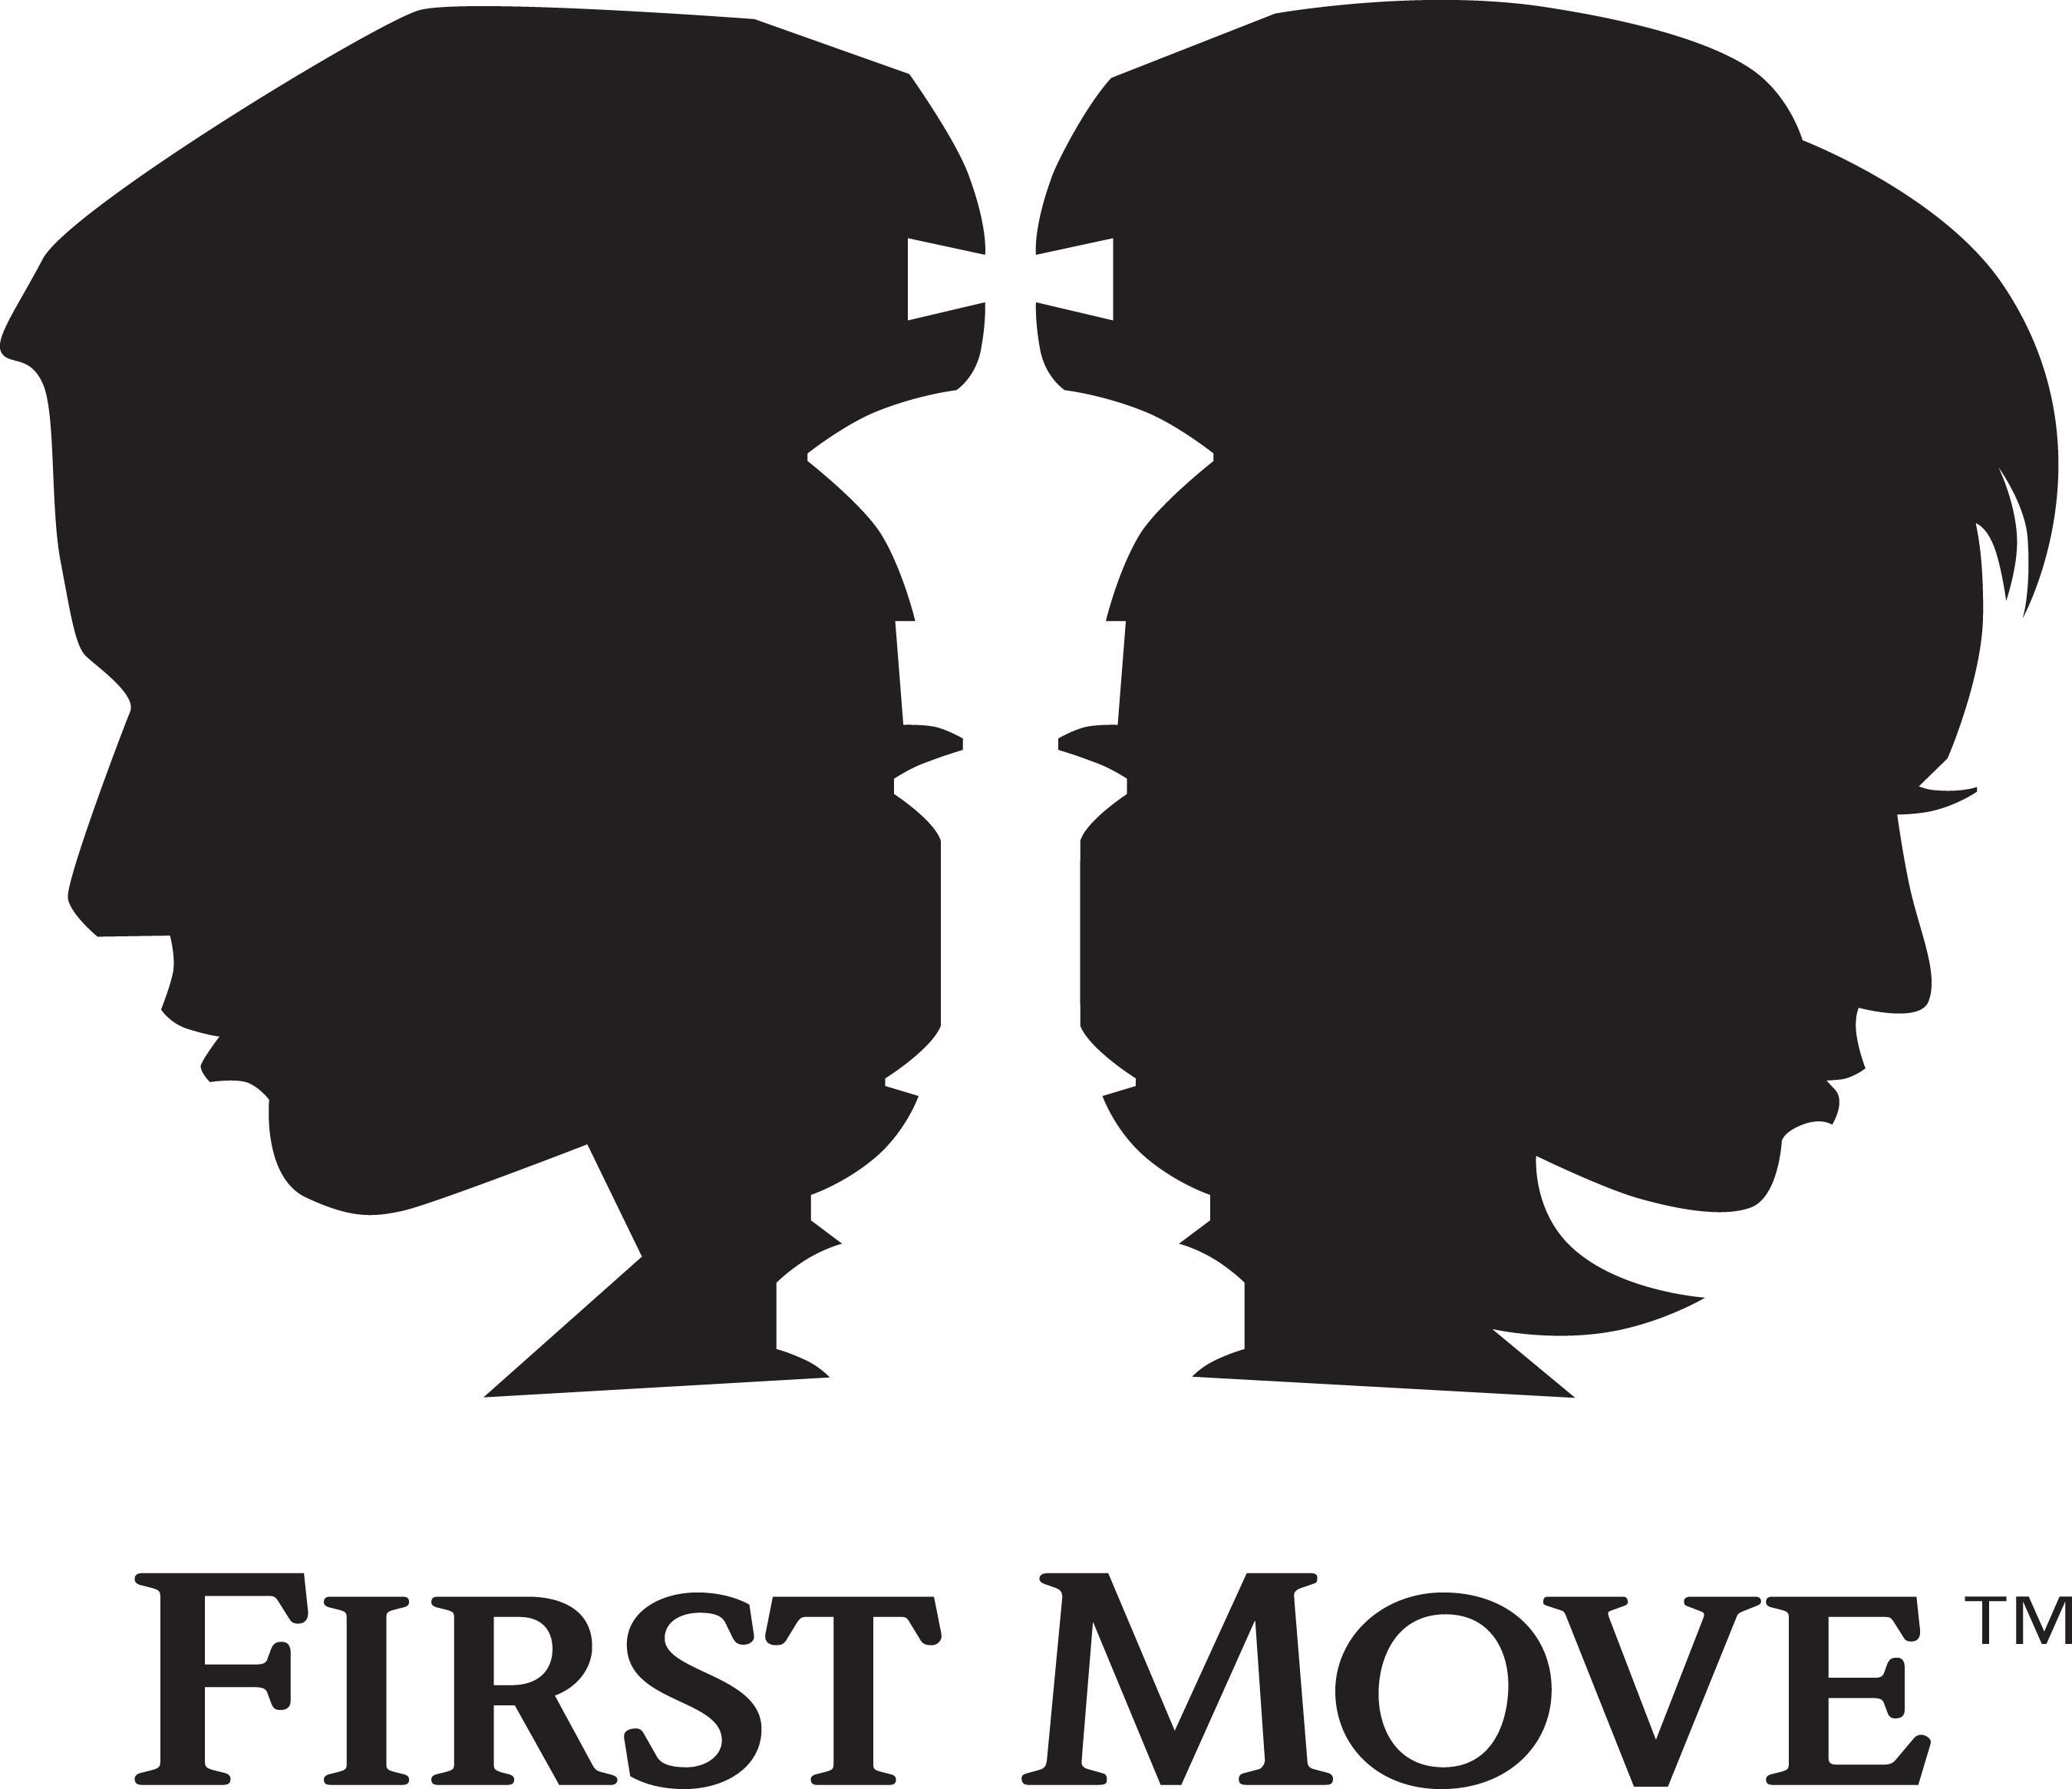 America's Foundation for Chess developed the First Move curriculum based on the belief that chess is a powerful tool to engage students and teach critical thinking skills. (PRNewsFoto/First Move) (PRNewsFoto/FIRST MOVE)